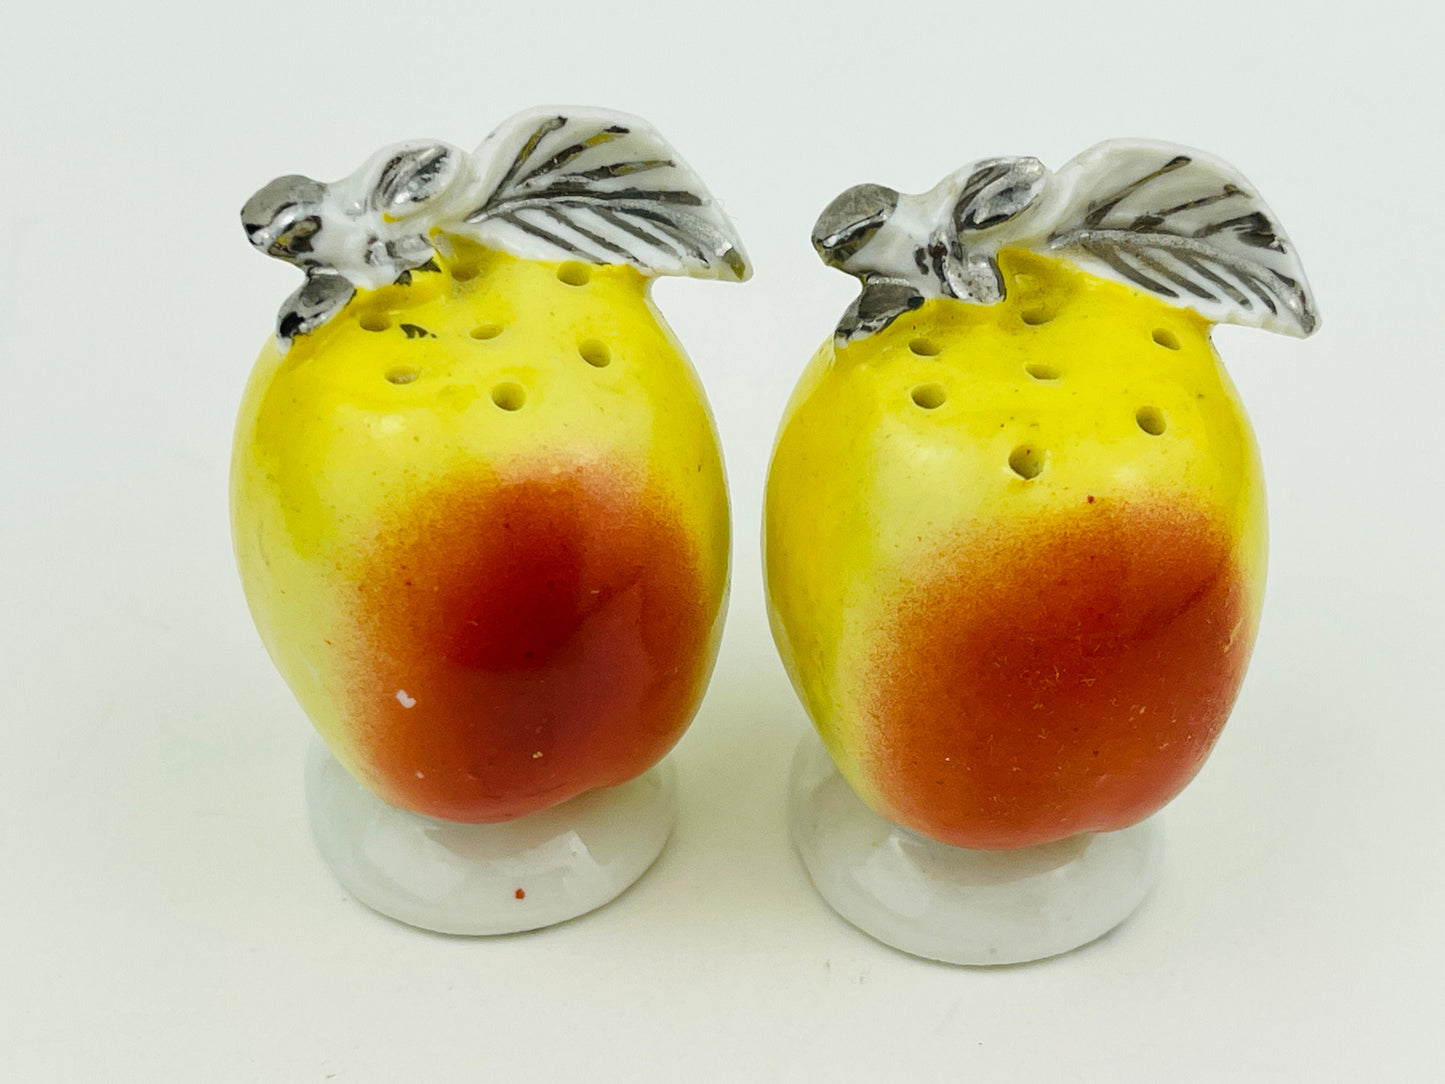 VTG Mini Apples Salt and Pepper Shakers Cute Vintage Kitschy Fruit Kitchen Decor 1940's Collectable Apple Figurines Made in Germany